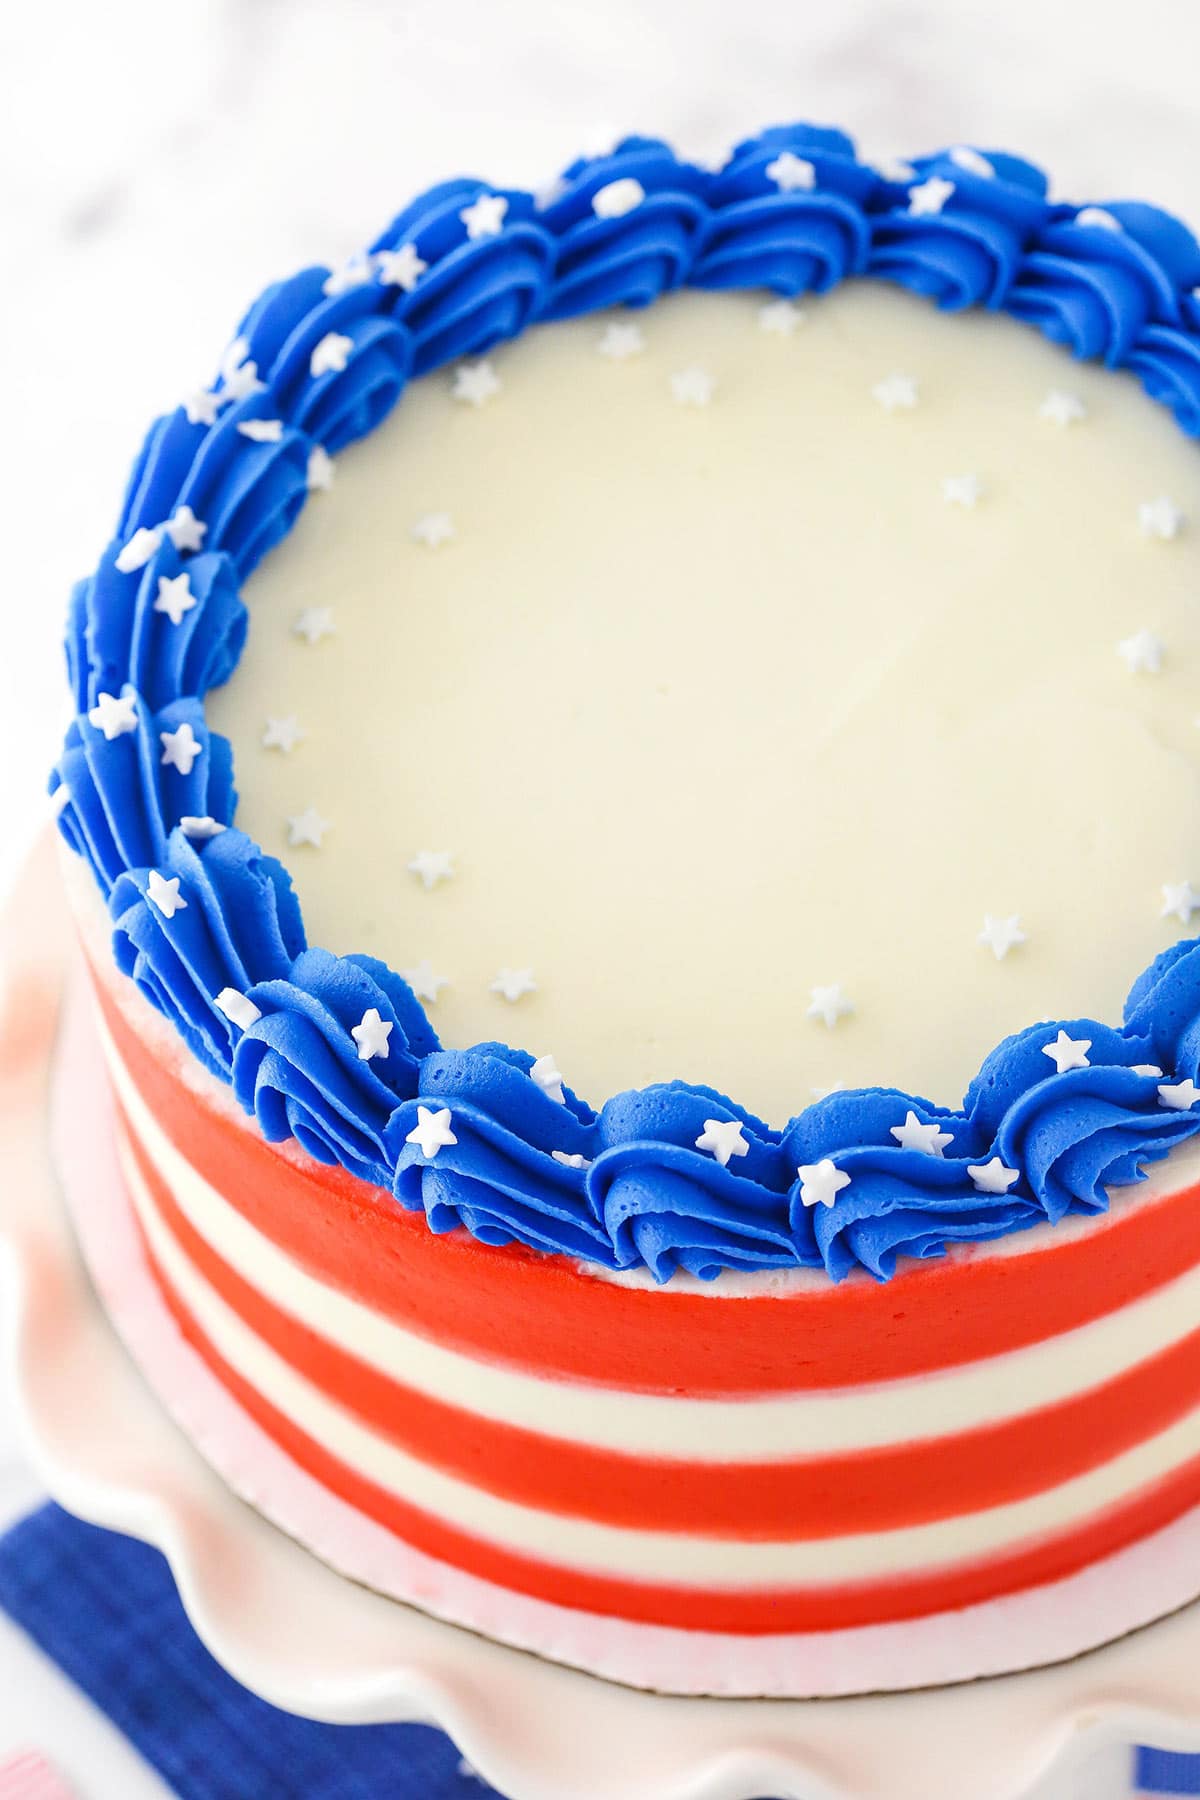 A July 4th marble cake on a white cake stand with white sprinkles garnishing the cake